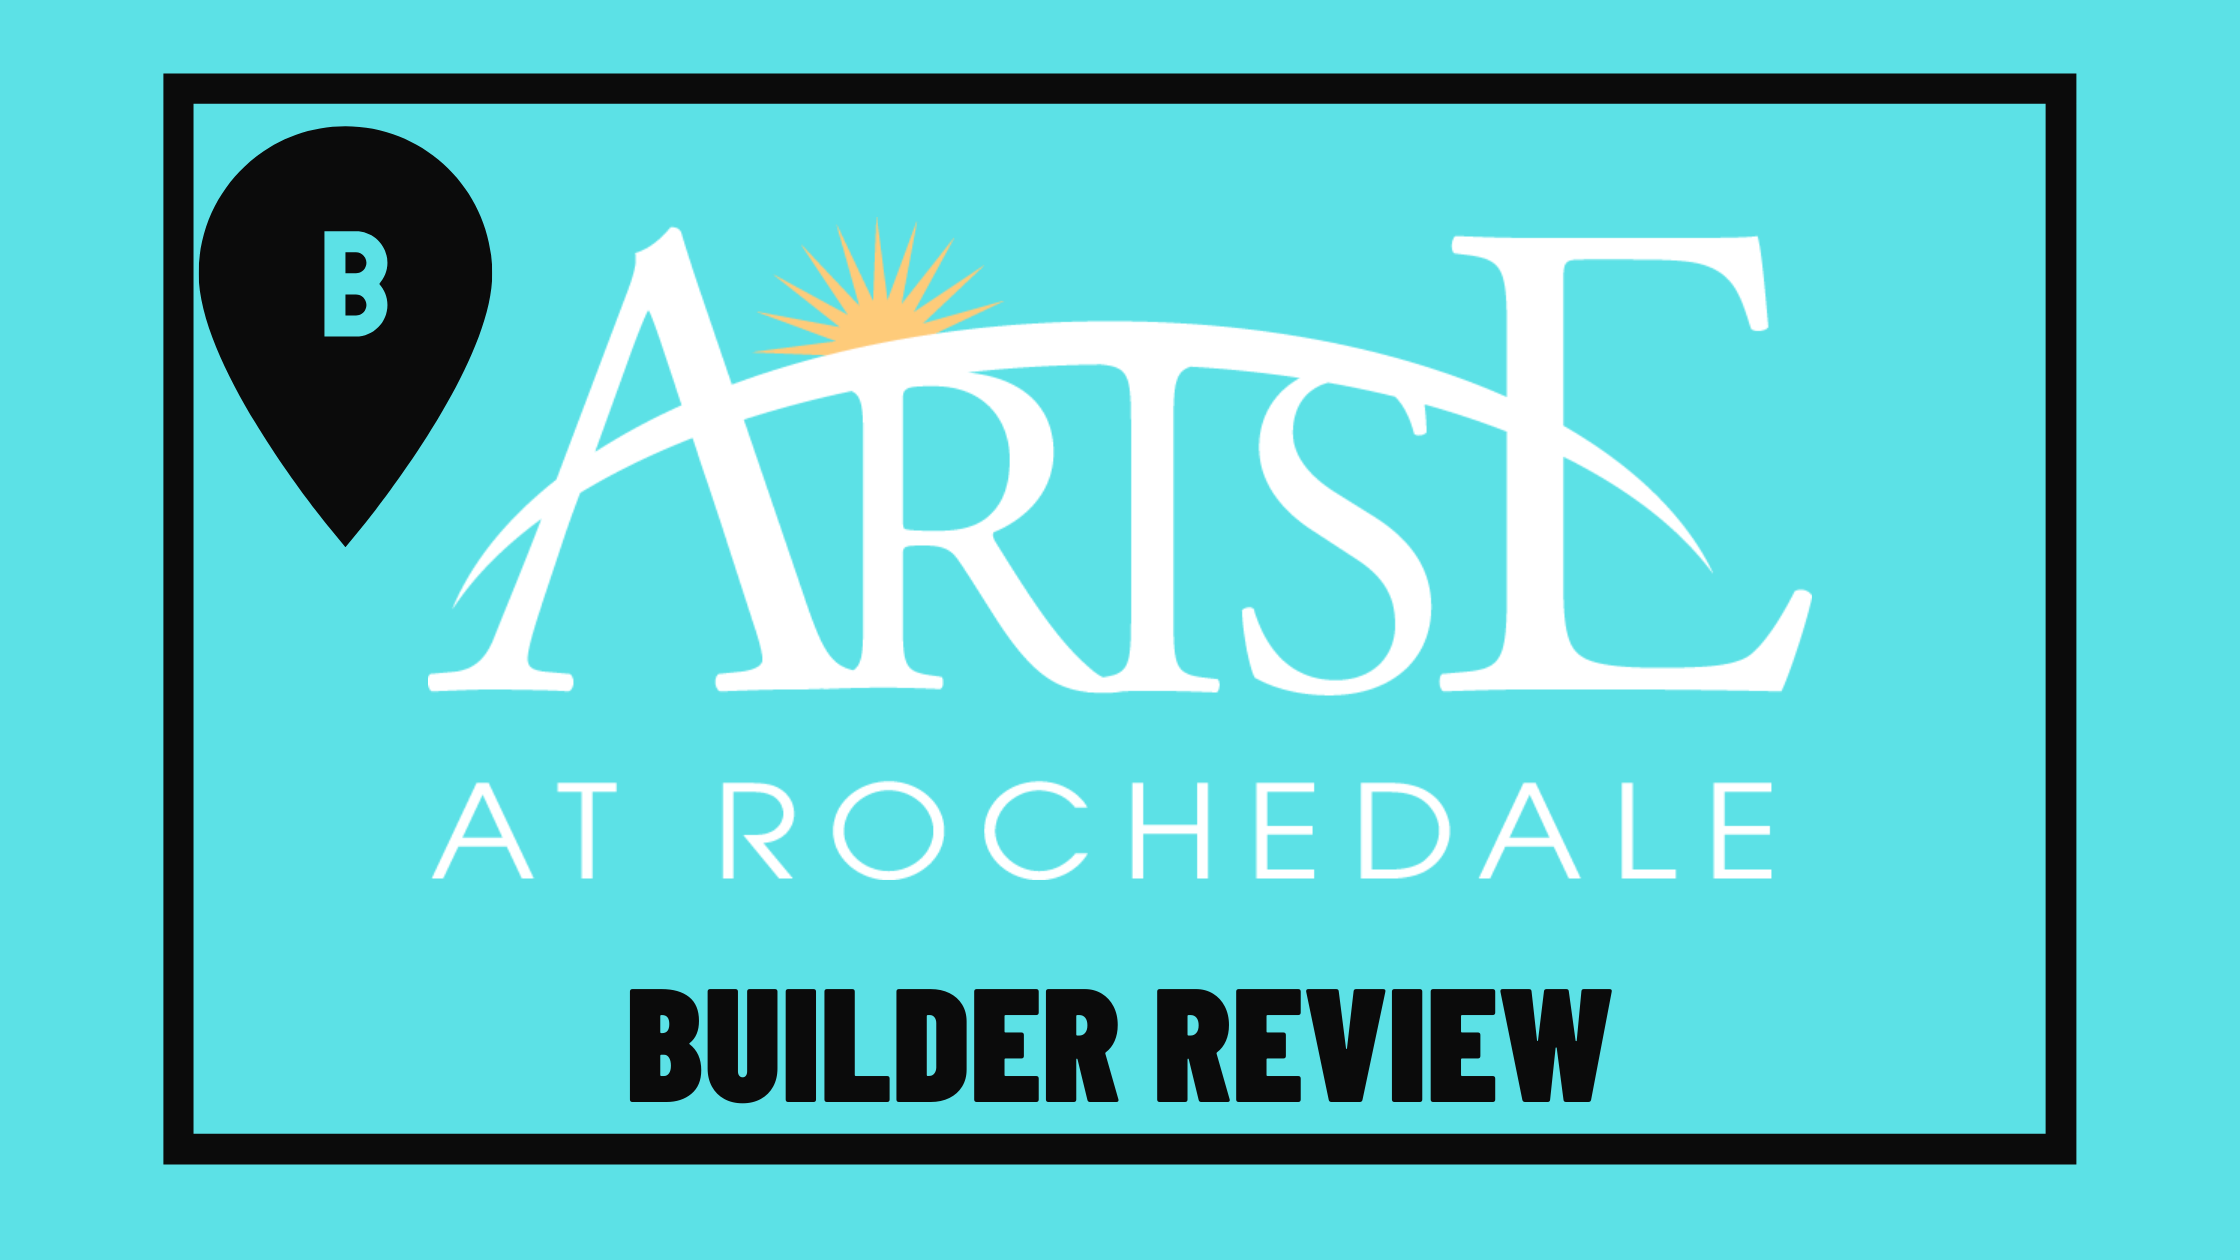 Arise Rochedale Display Village Review